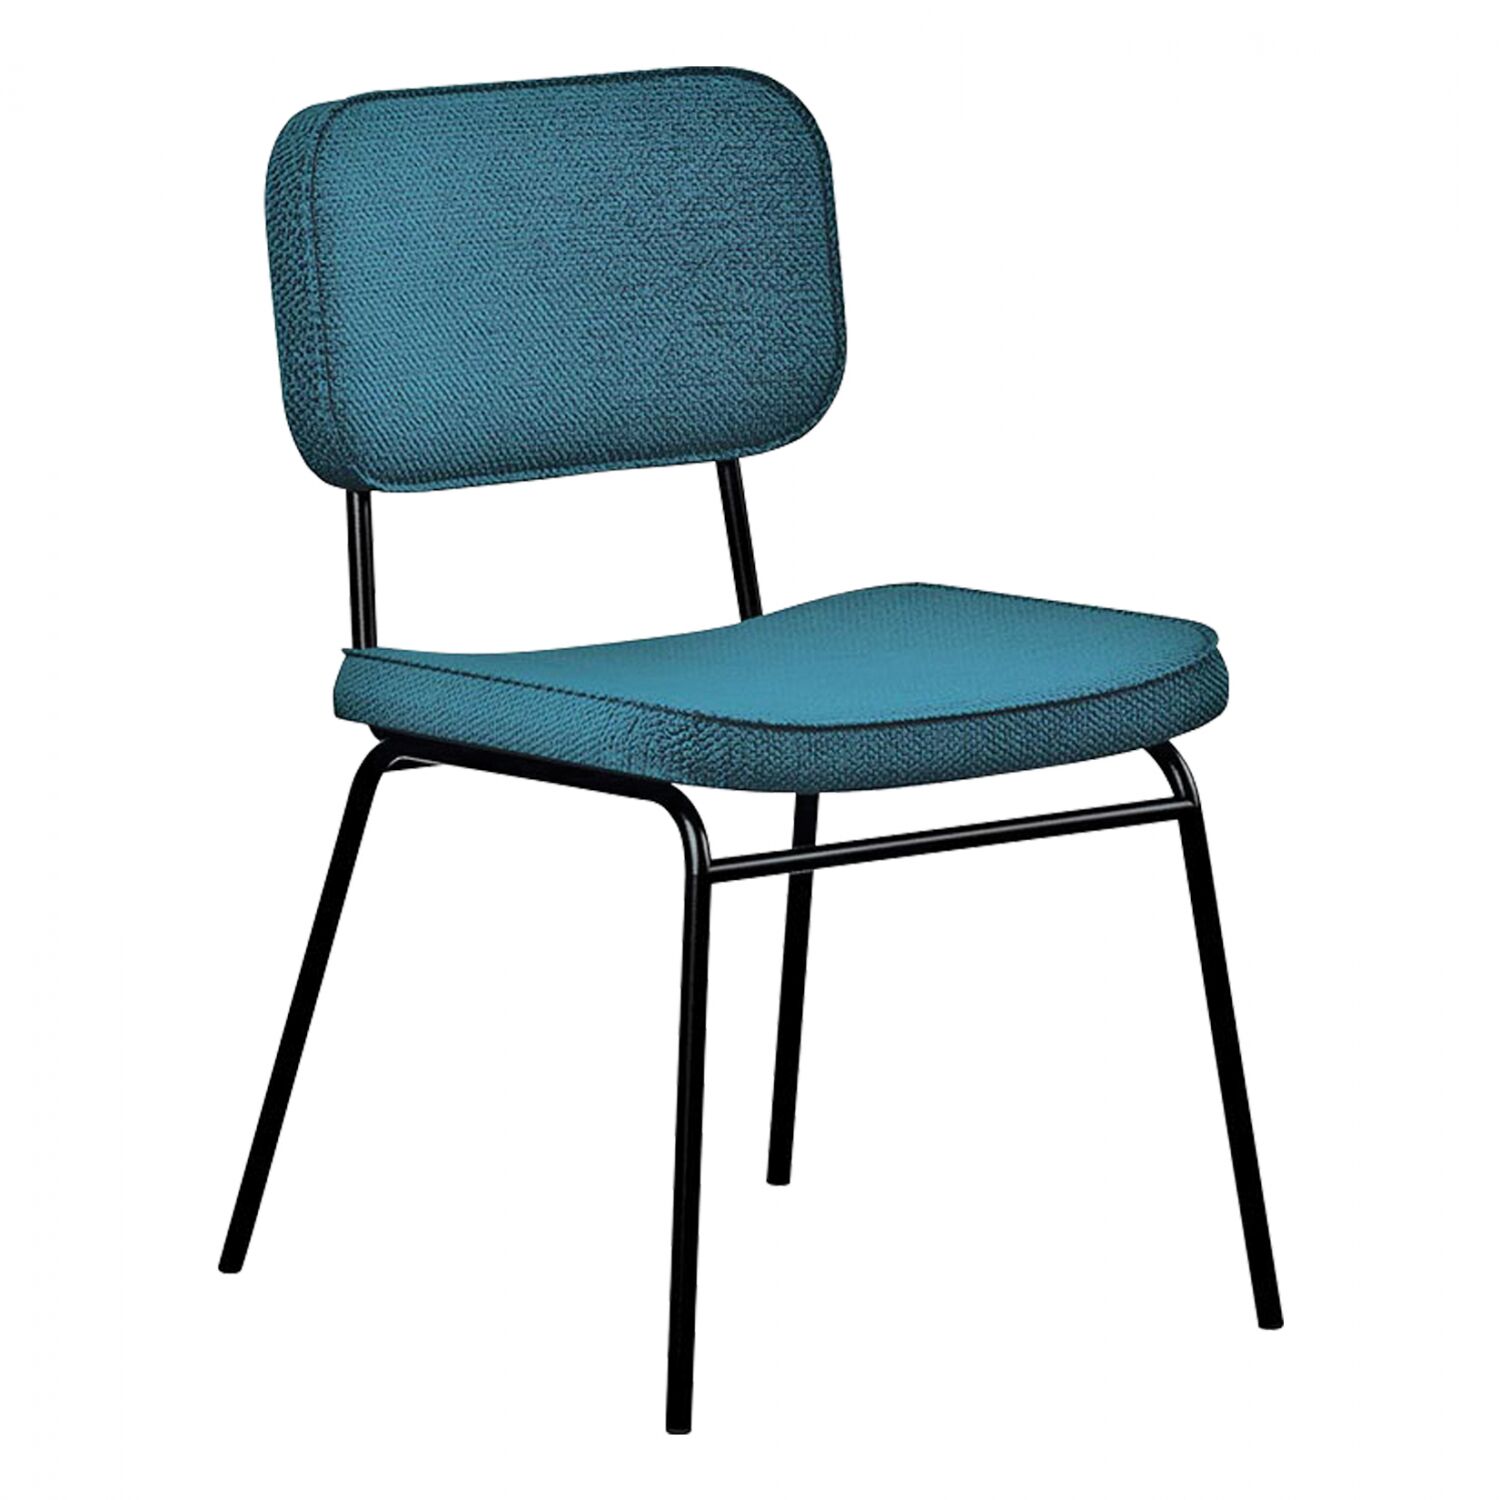 Metallic Chair TS329 with fabric seat blue